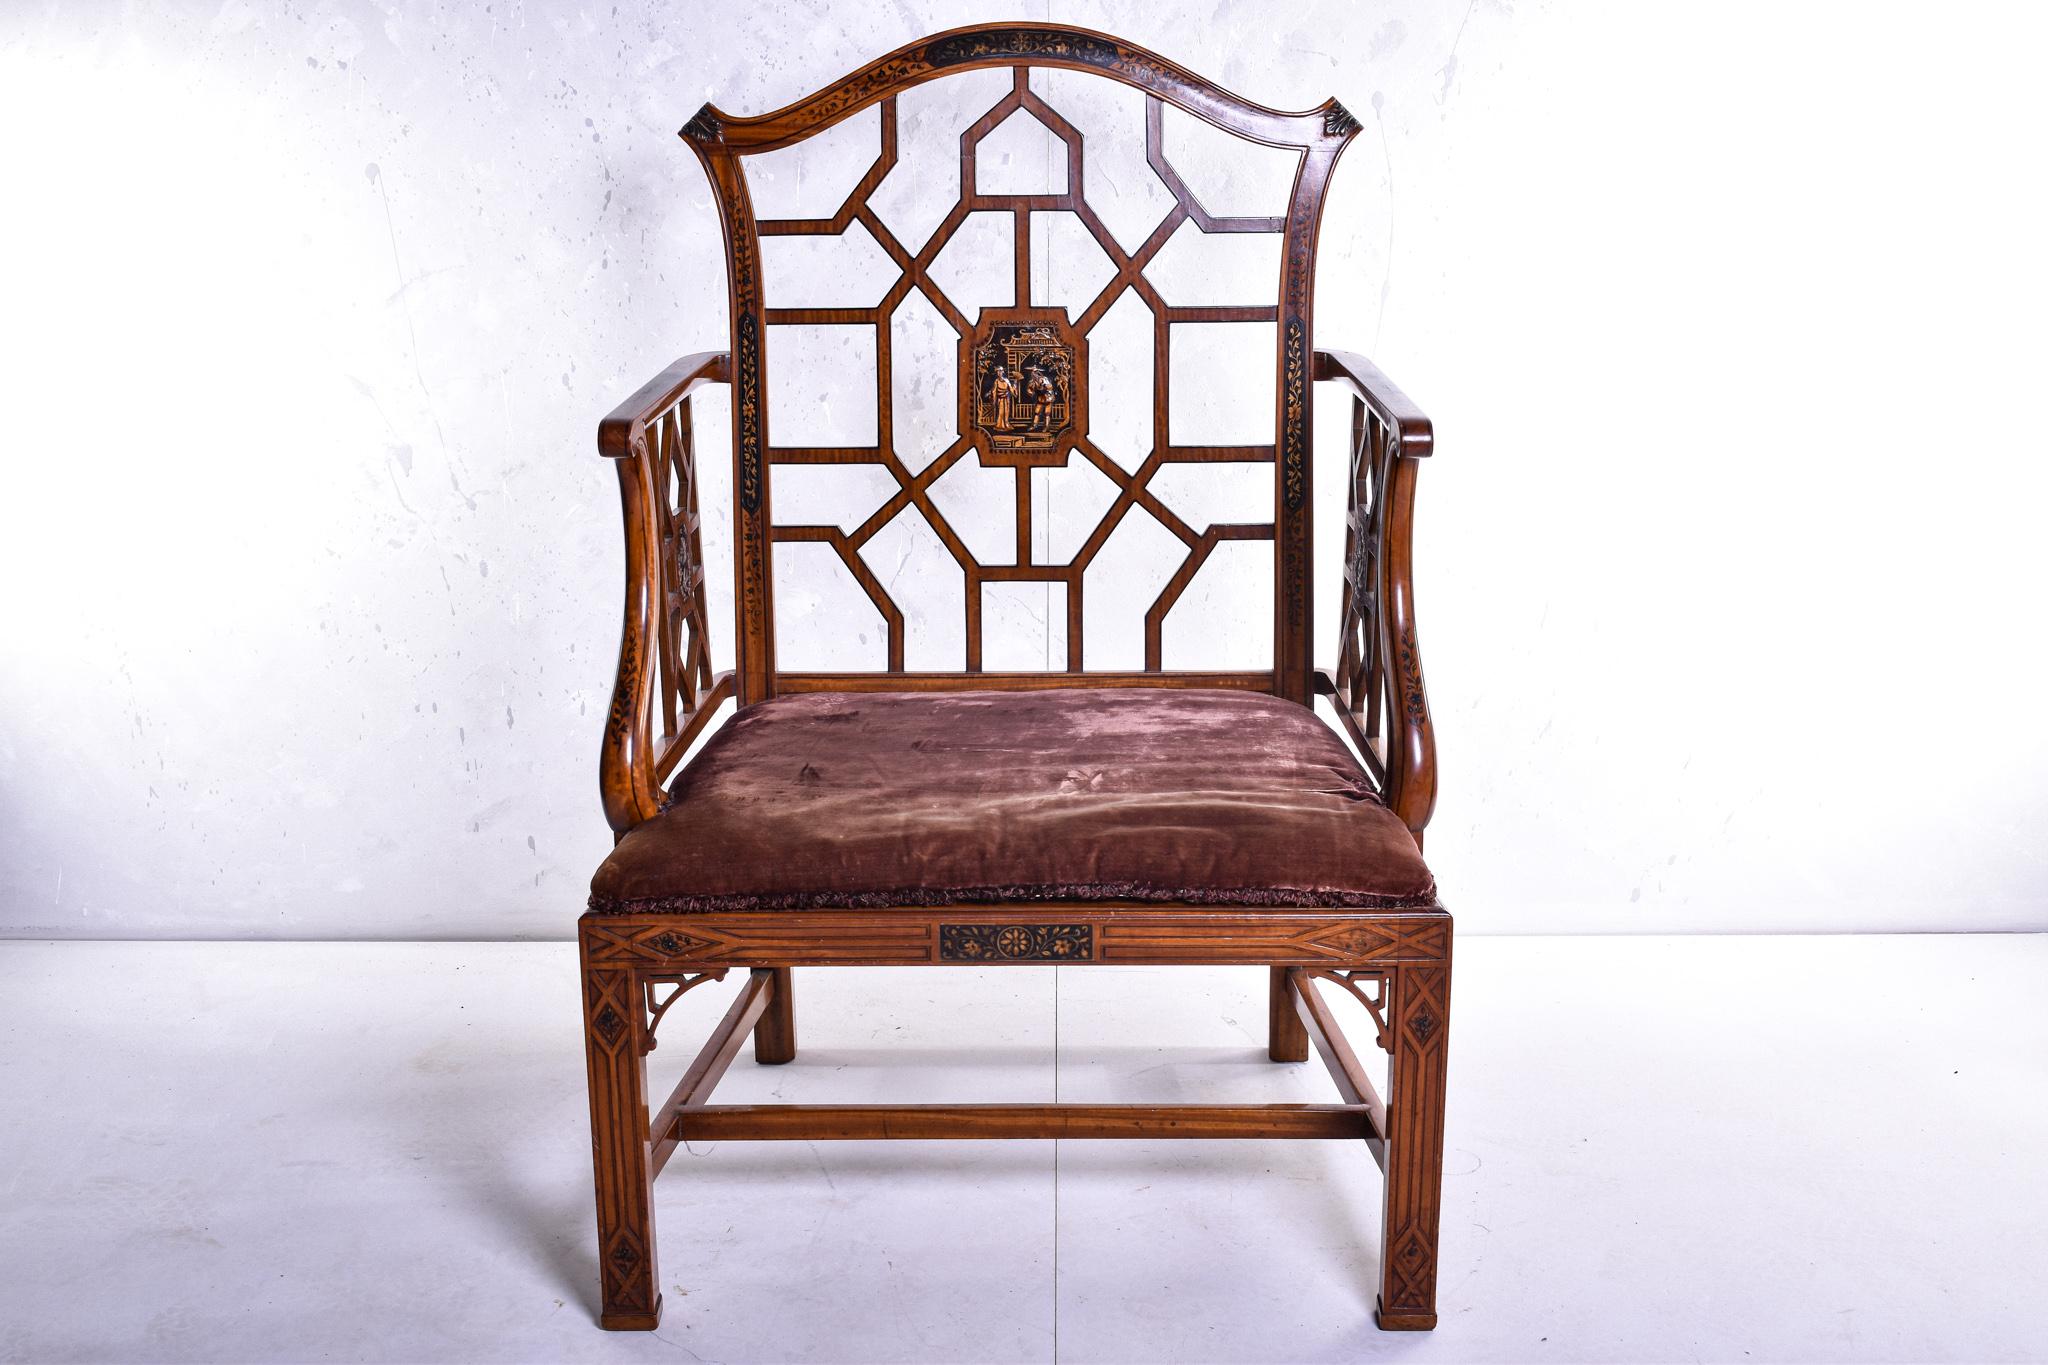 A simply wonderful satinwood armchair by Hille & Co, in the 'Chinese' taste, designed and crafted to the highest grade. The arched back centred with a Chinoiserie scene, painted arms with lattice supports above a caned seat with velvet cushion above